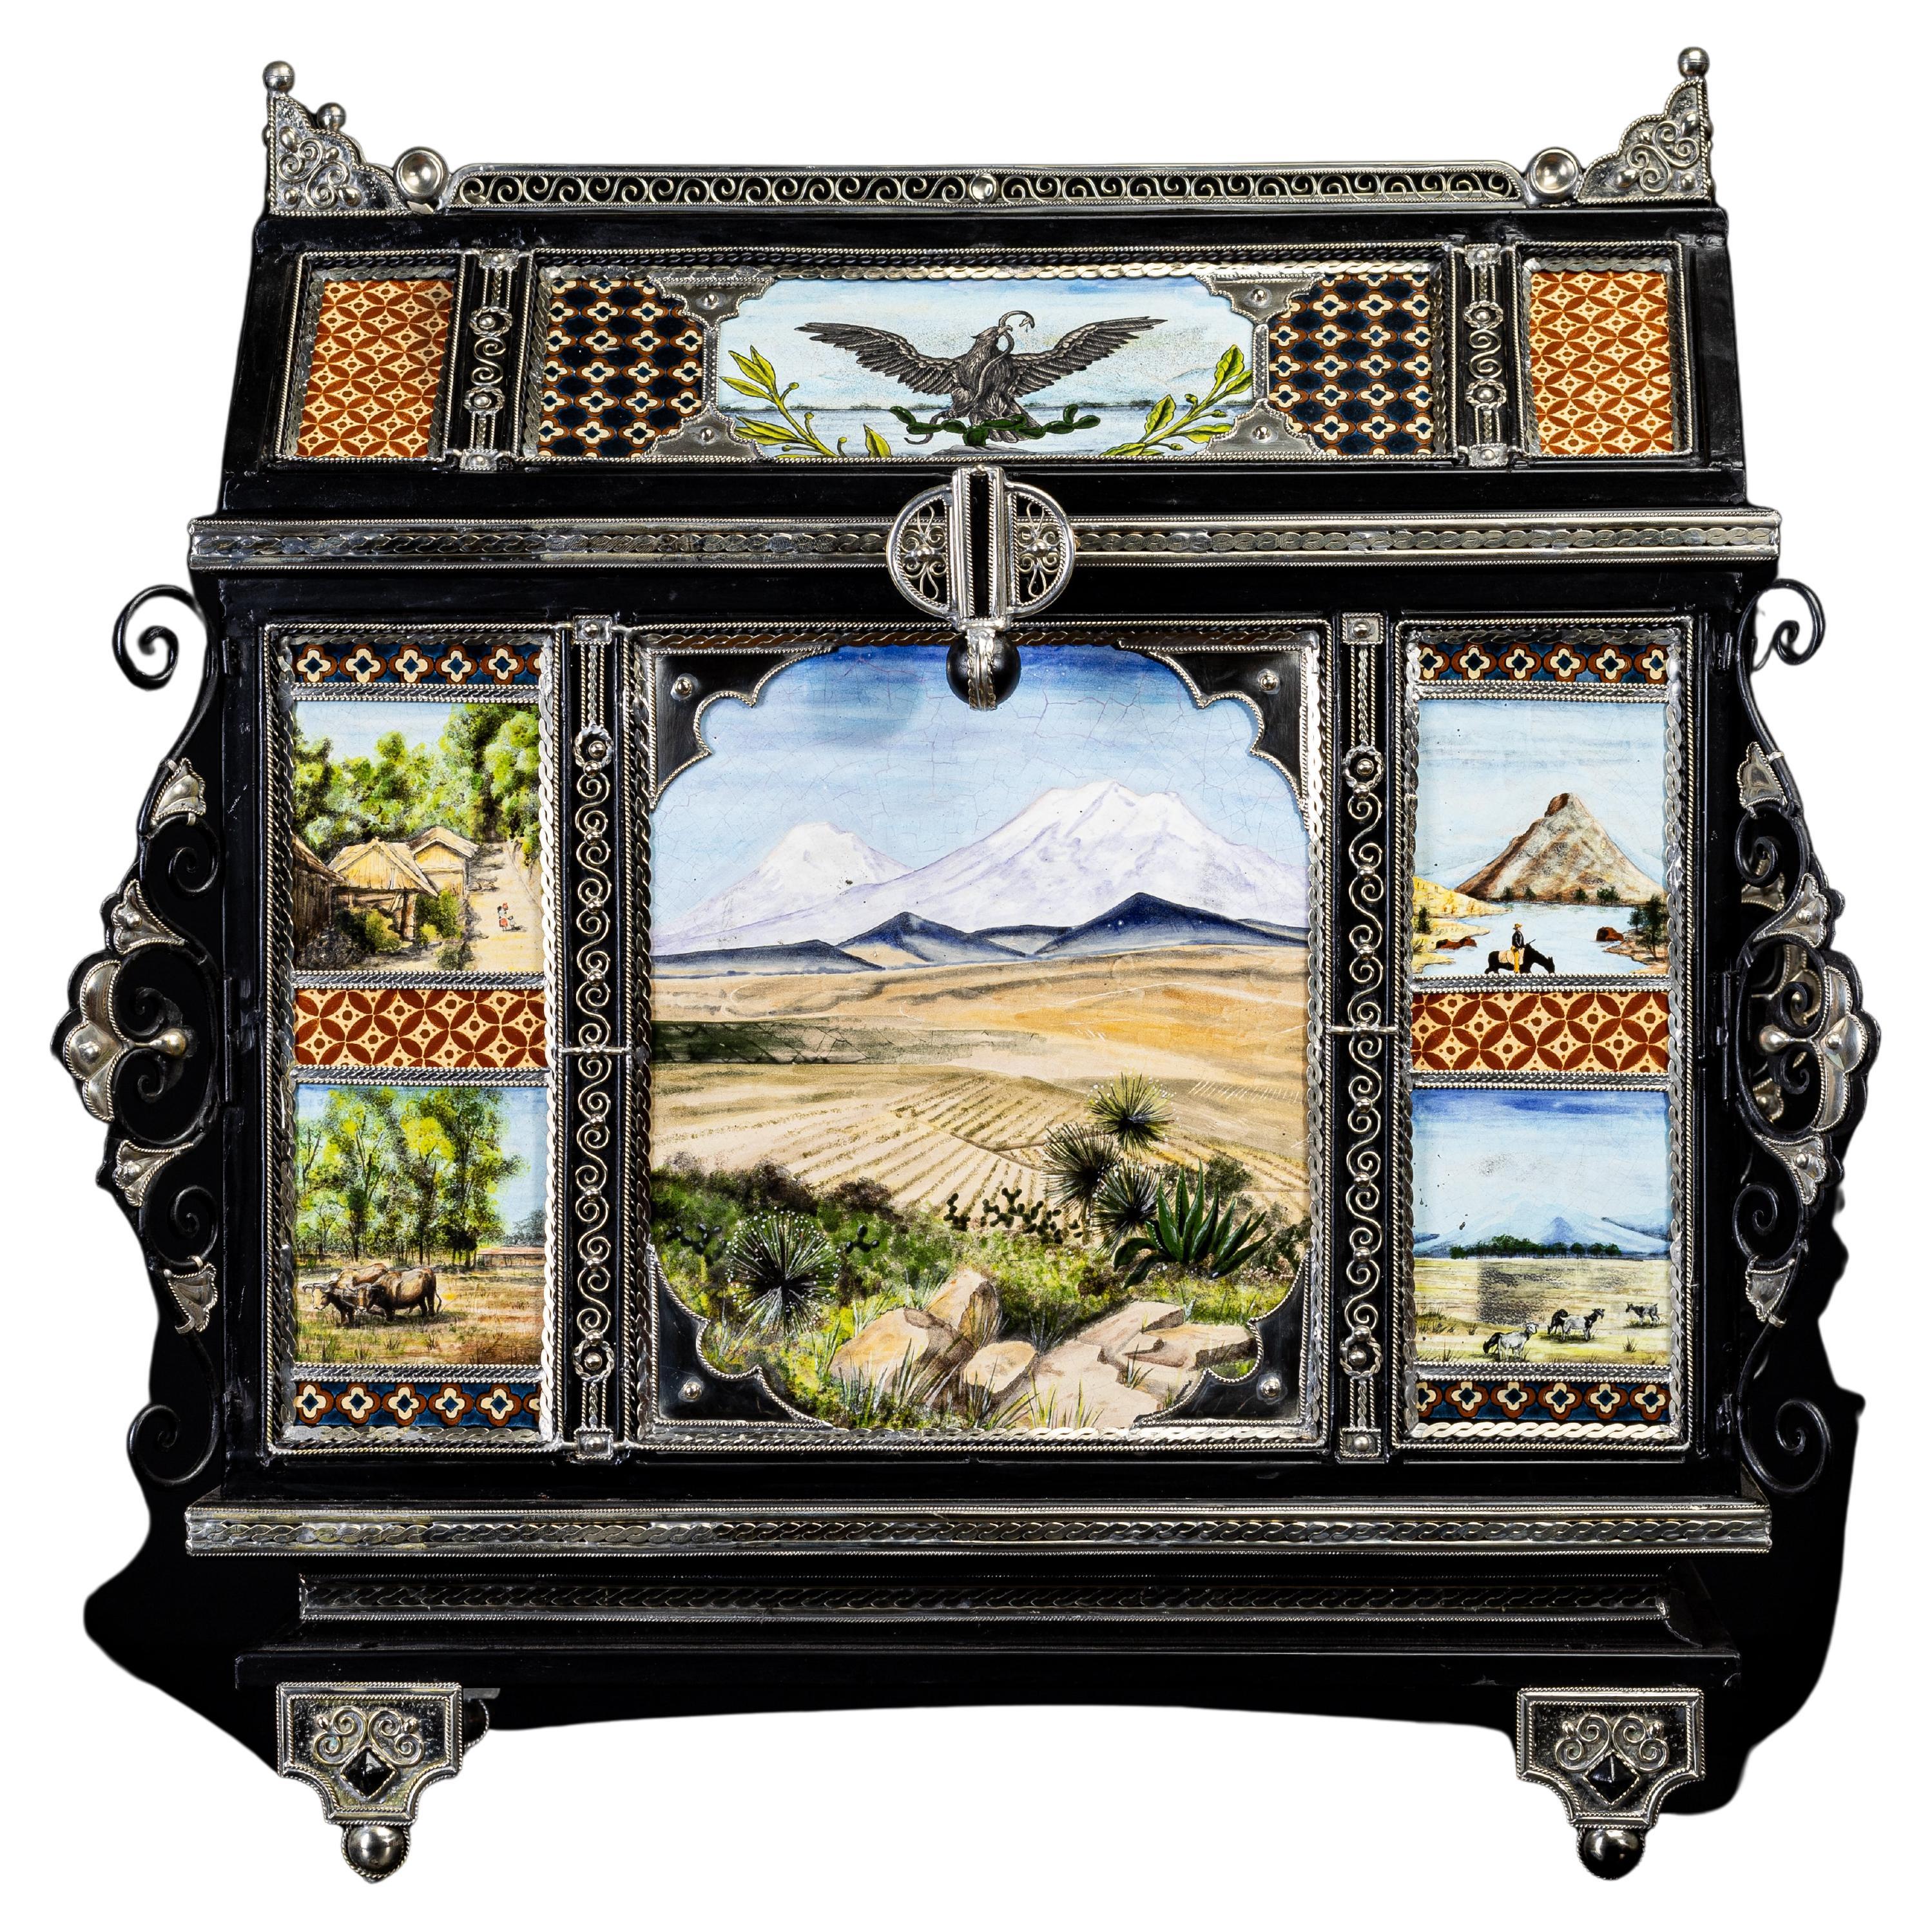 Always unique pieces is what you are going to hear about Jesus Guerrero Santo's work, all the pieces are handmade and created one by one it takes months to produce each peace.
This ceramic and white metal (alpaca) ashtray, was created in Tonalá,